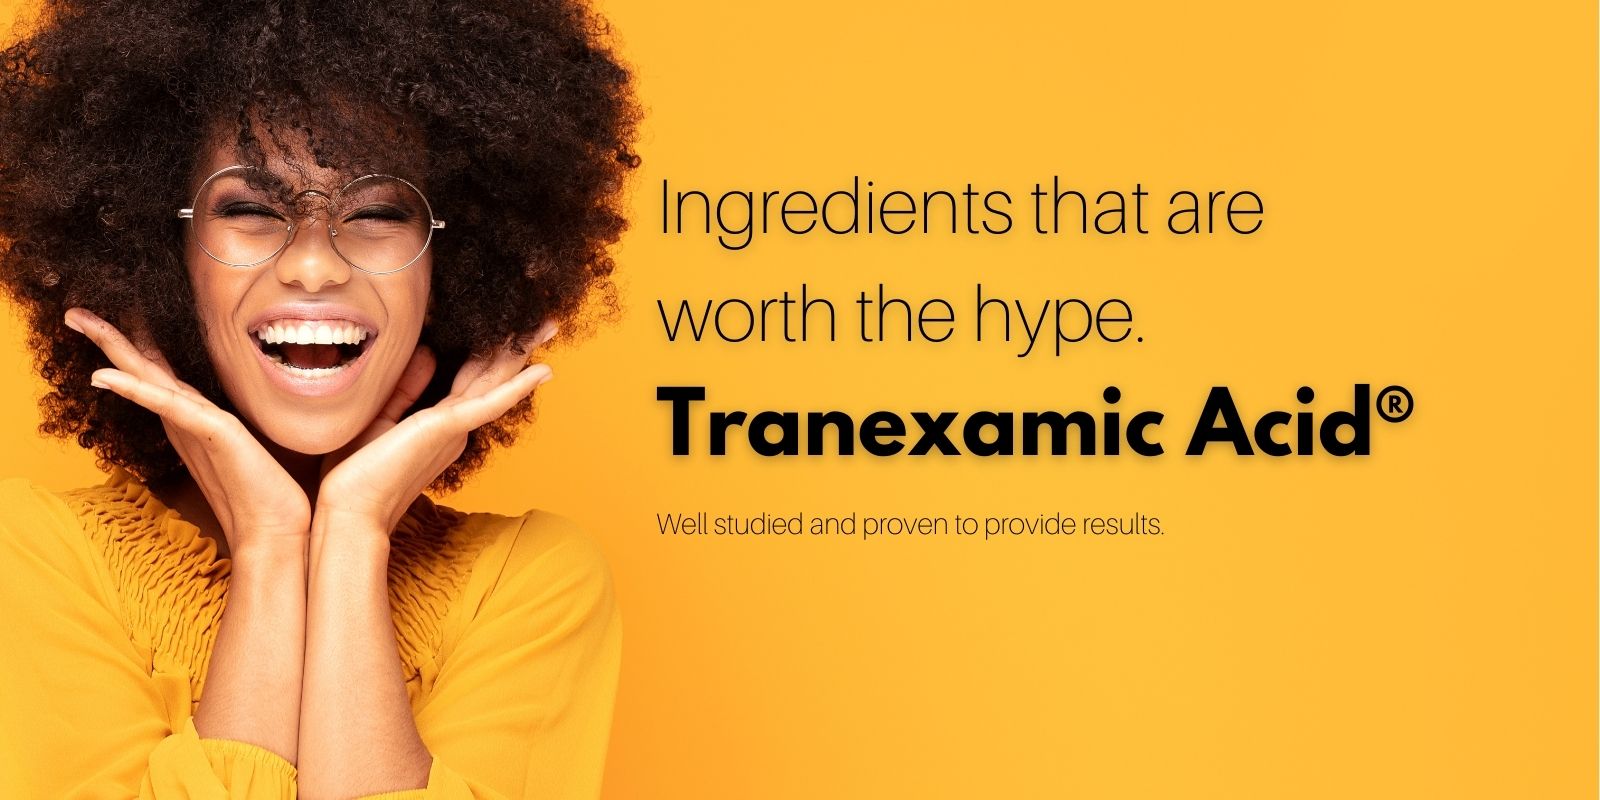 tranexamic acid for treating rosacea and inflammation and sun damage